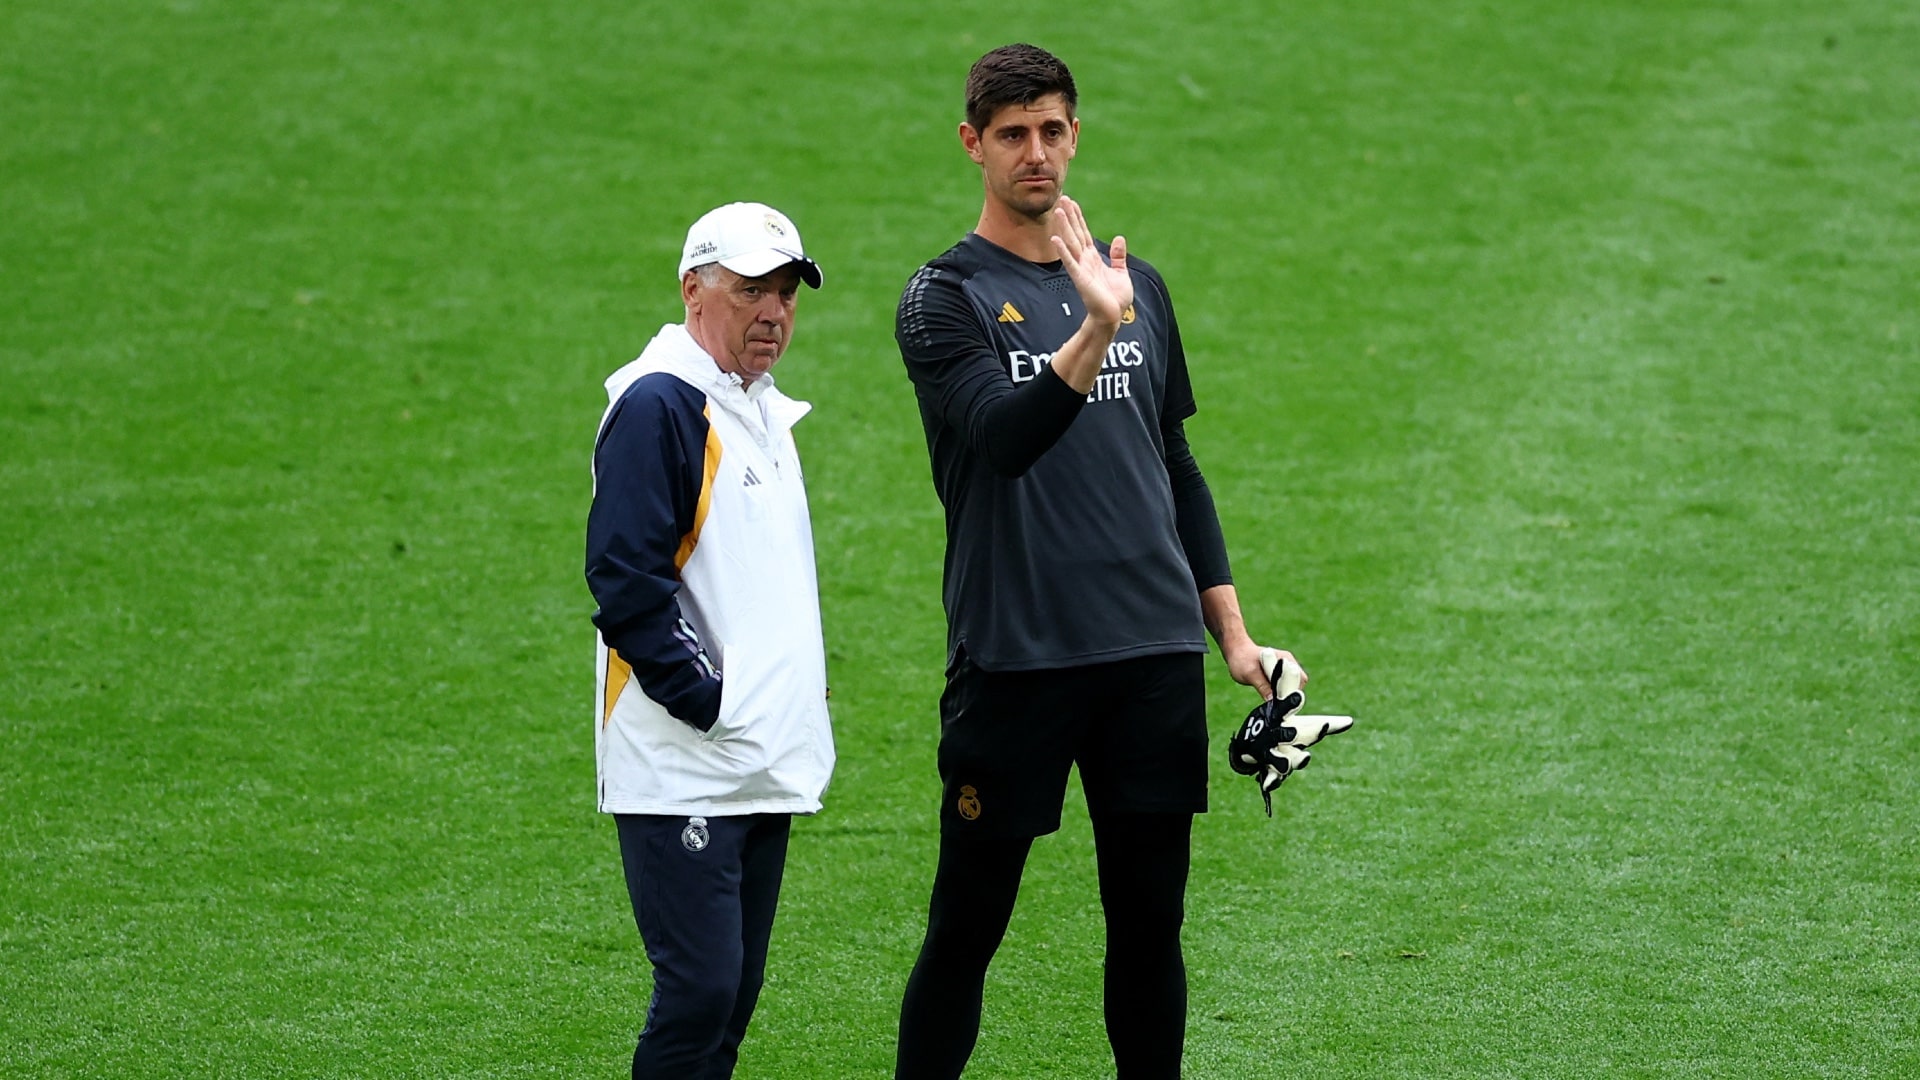 Courtois to start for Real Madrid in Champions League final, Ancelotti says